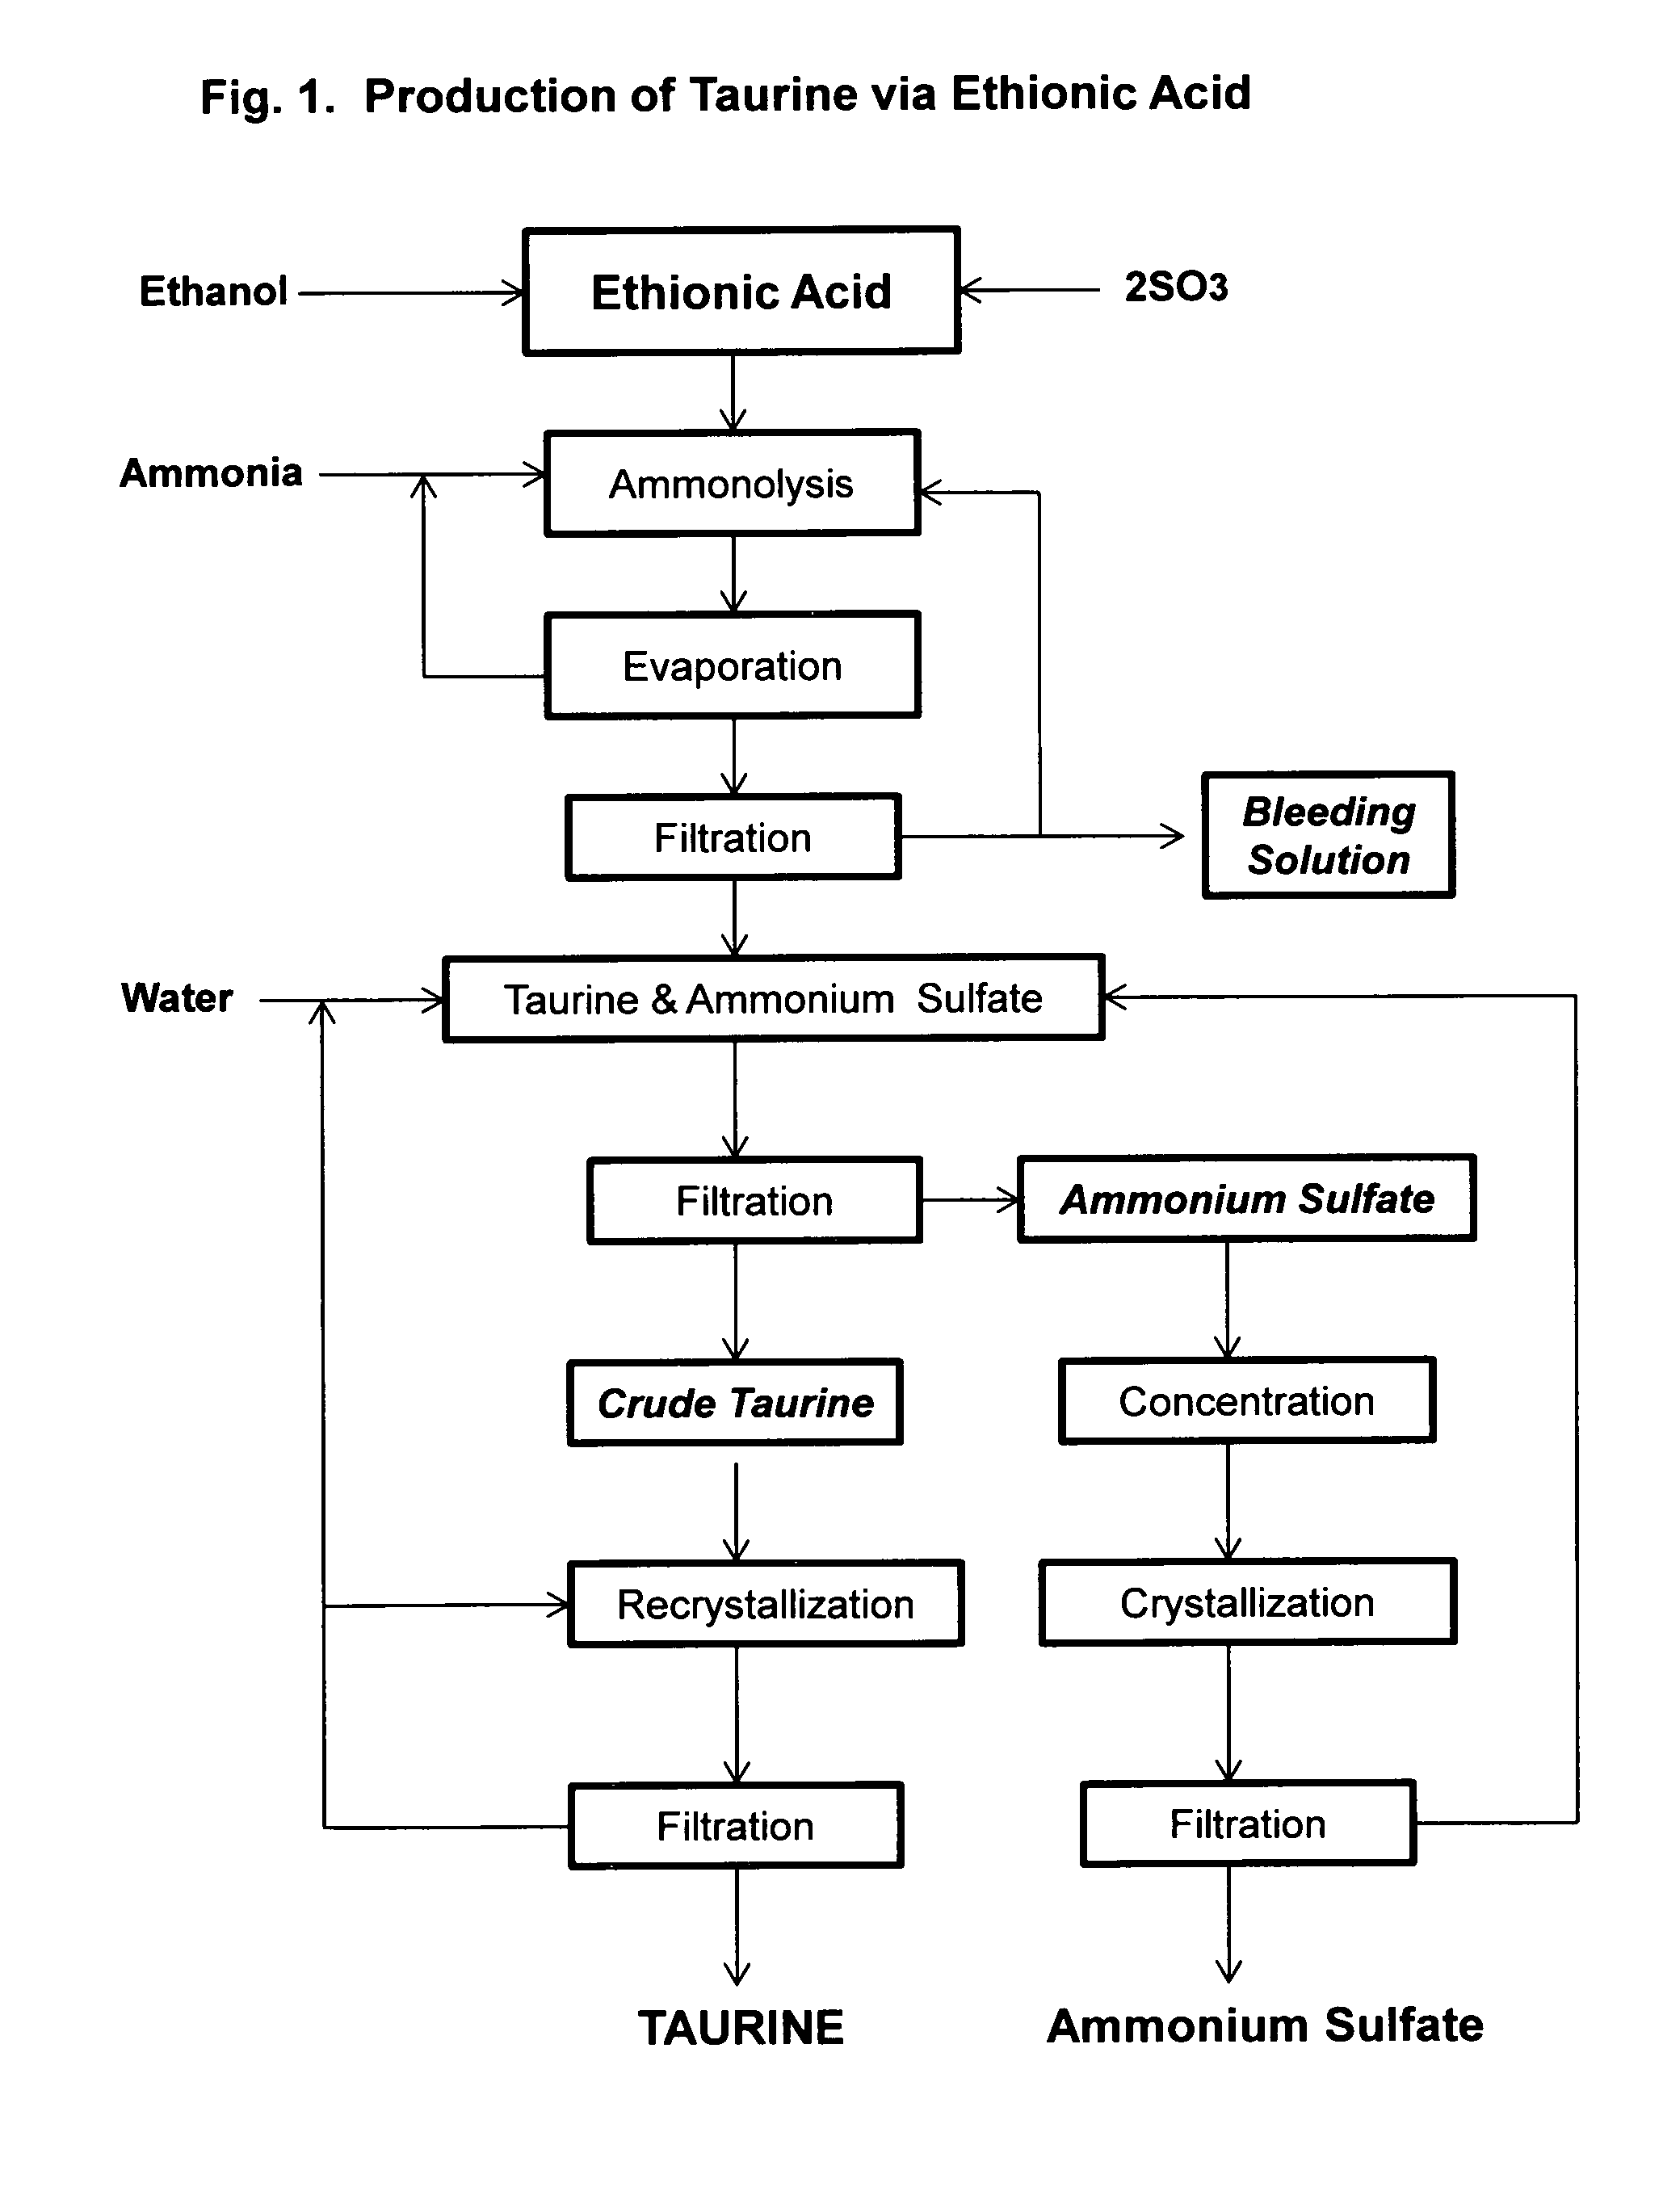 Process for the production of taurine from ethanol